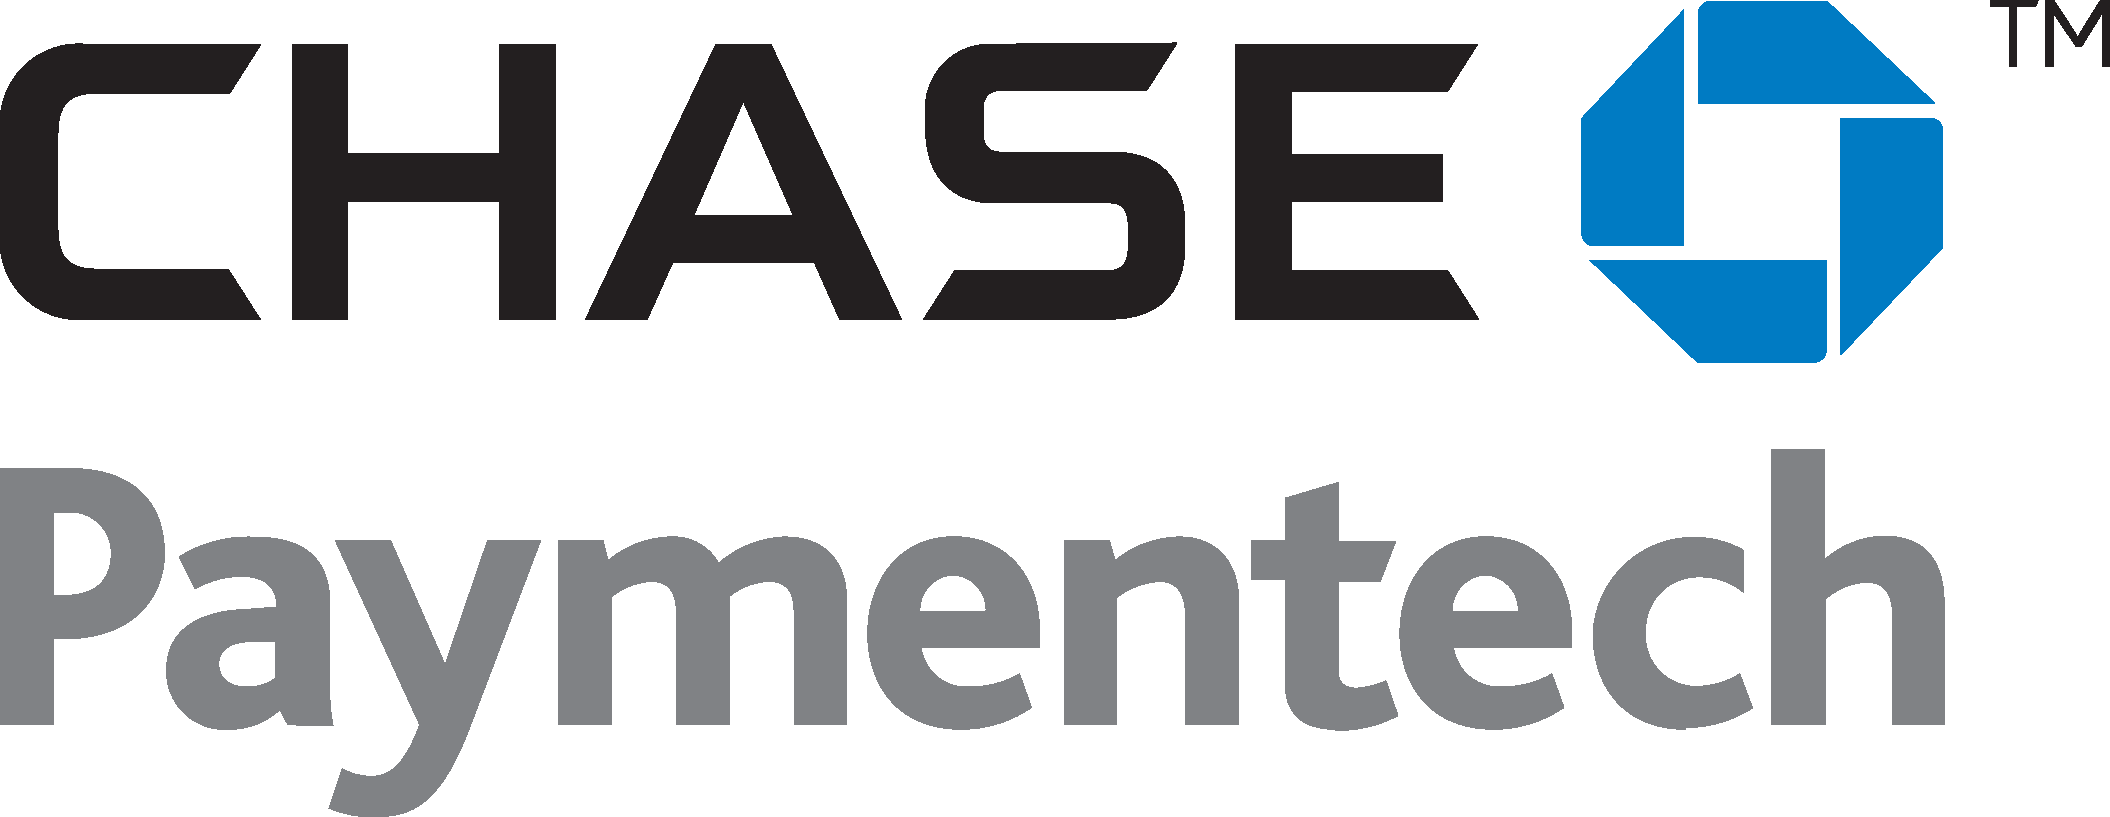 Chase Paymentech Logo png